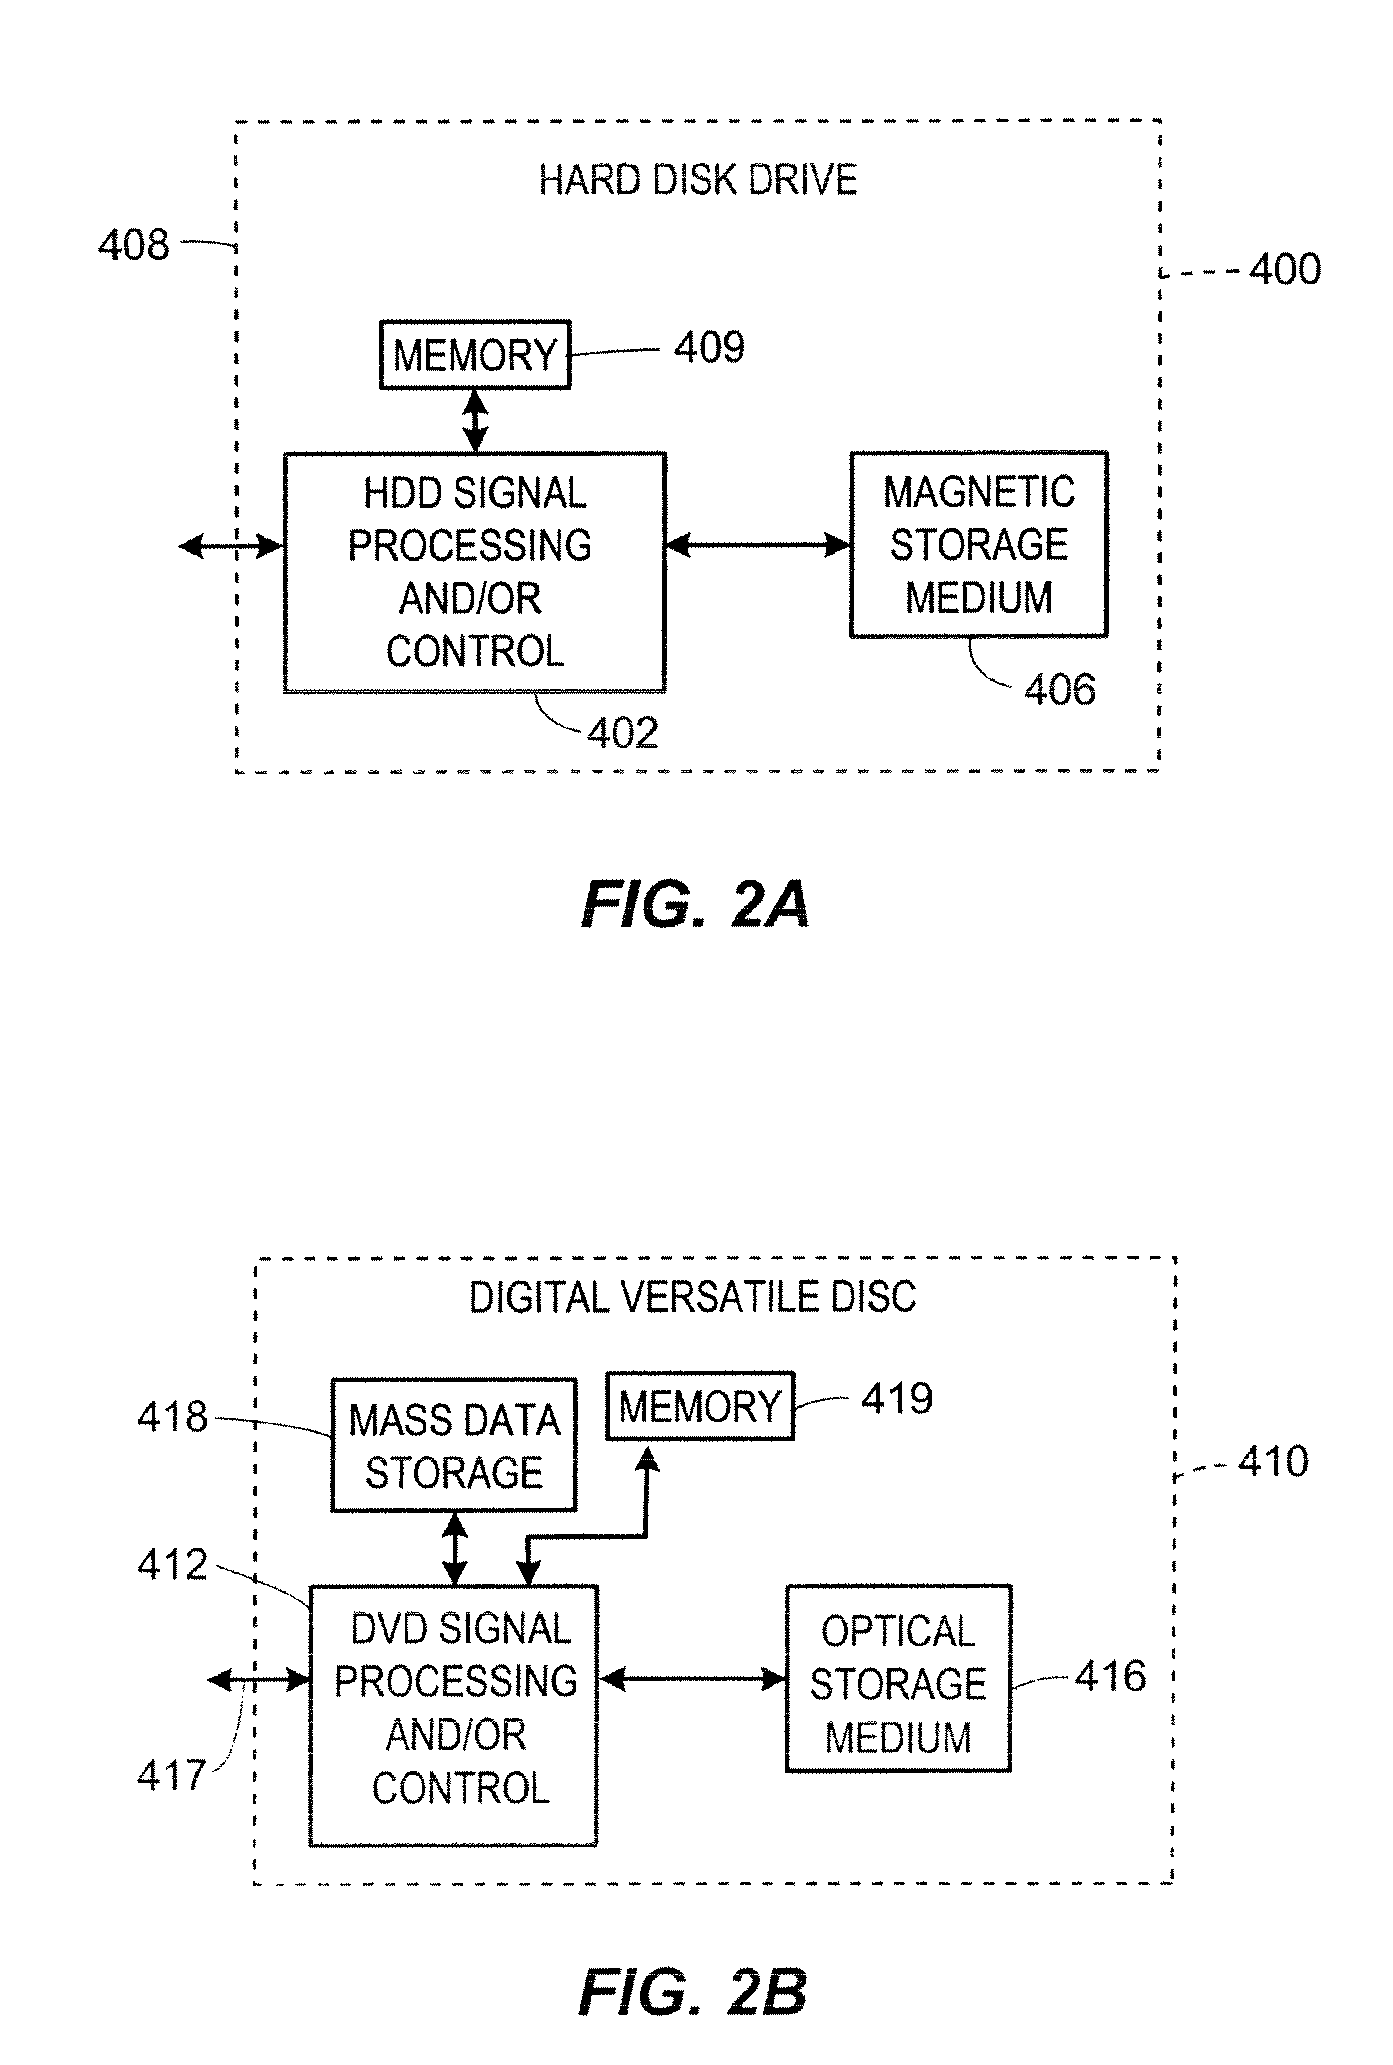 Equal power output spatial spreading matrix for use in a wireless MIMO communication system